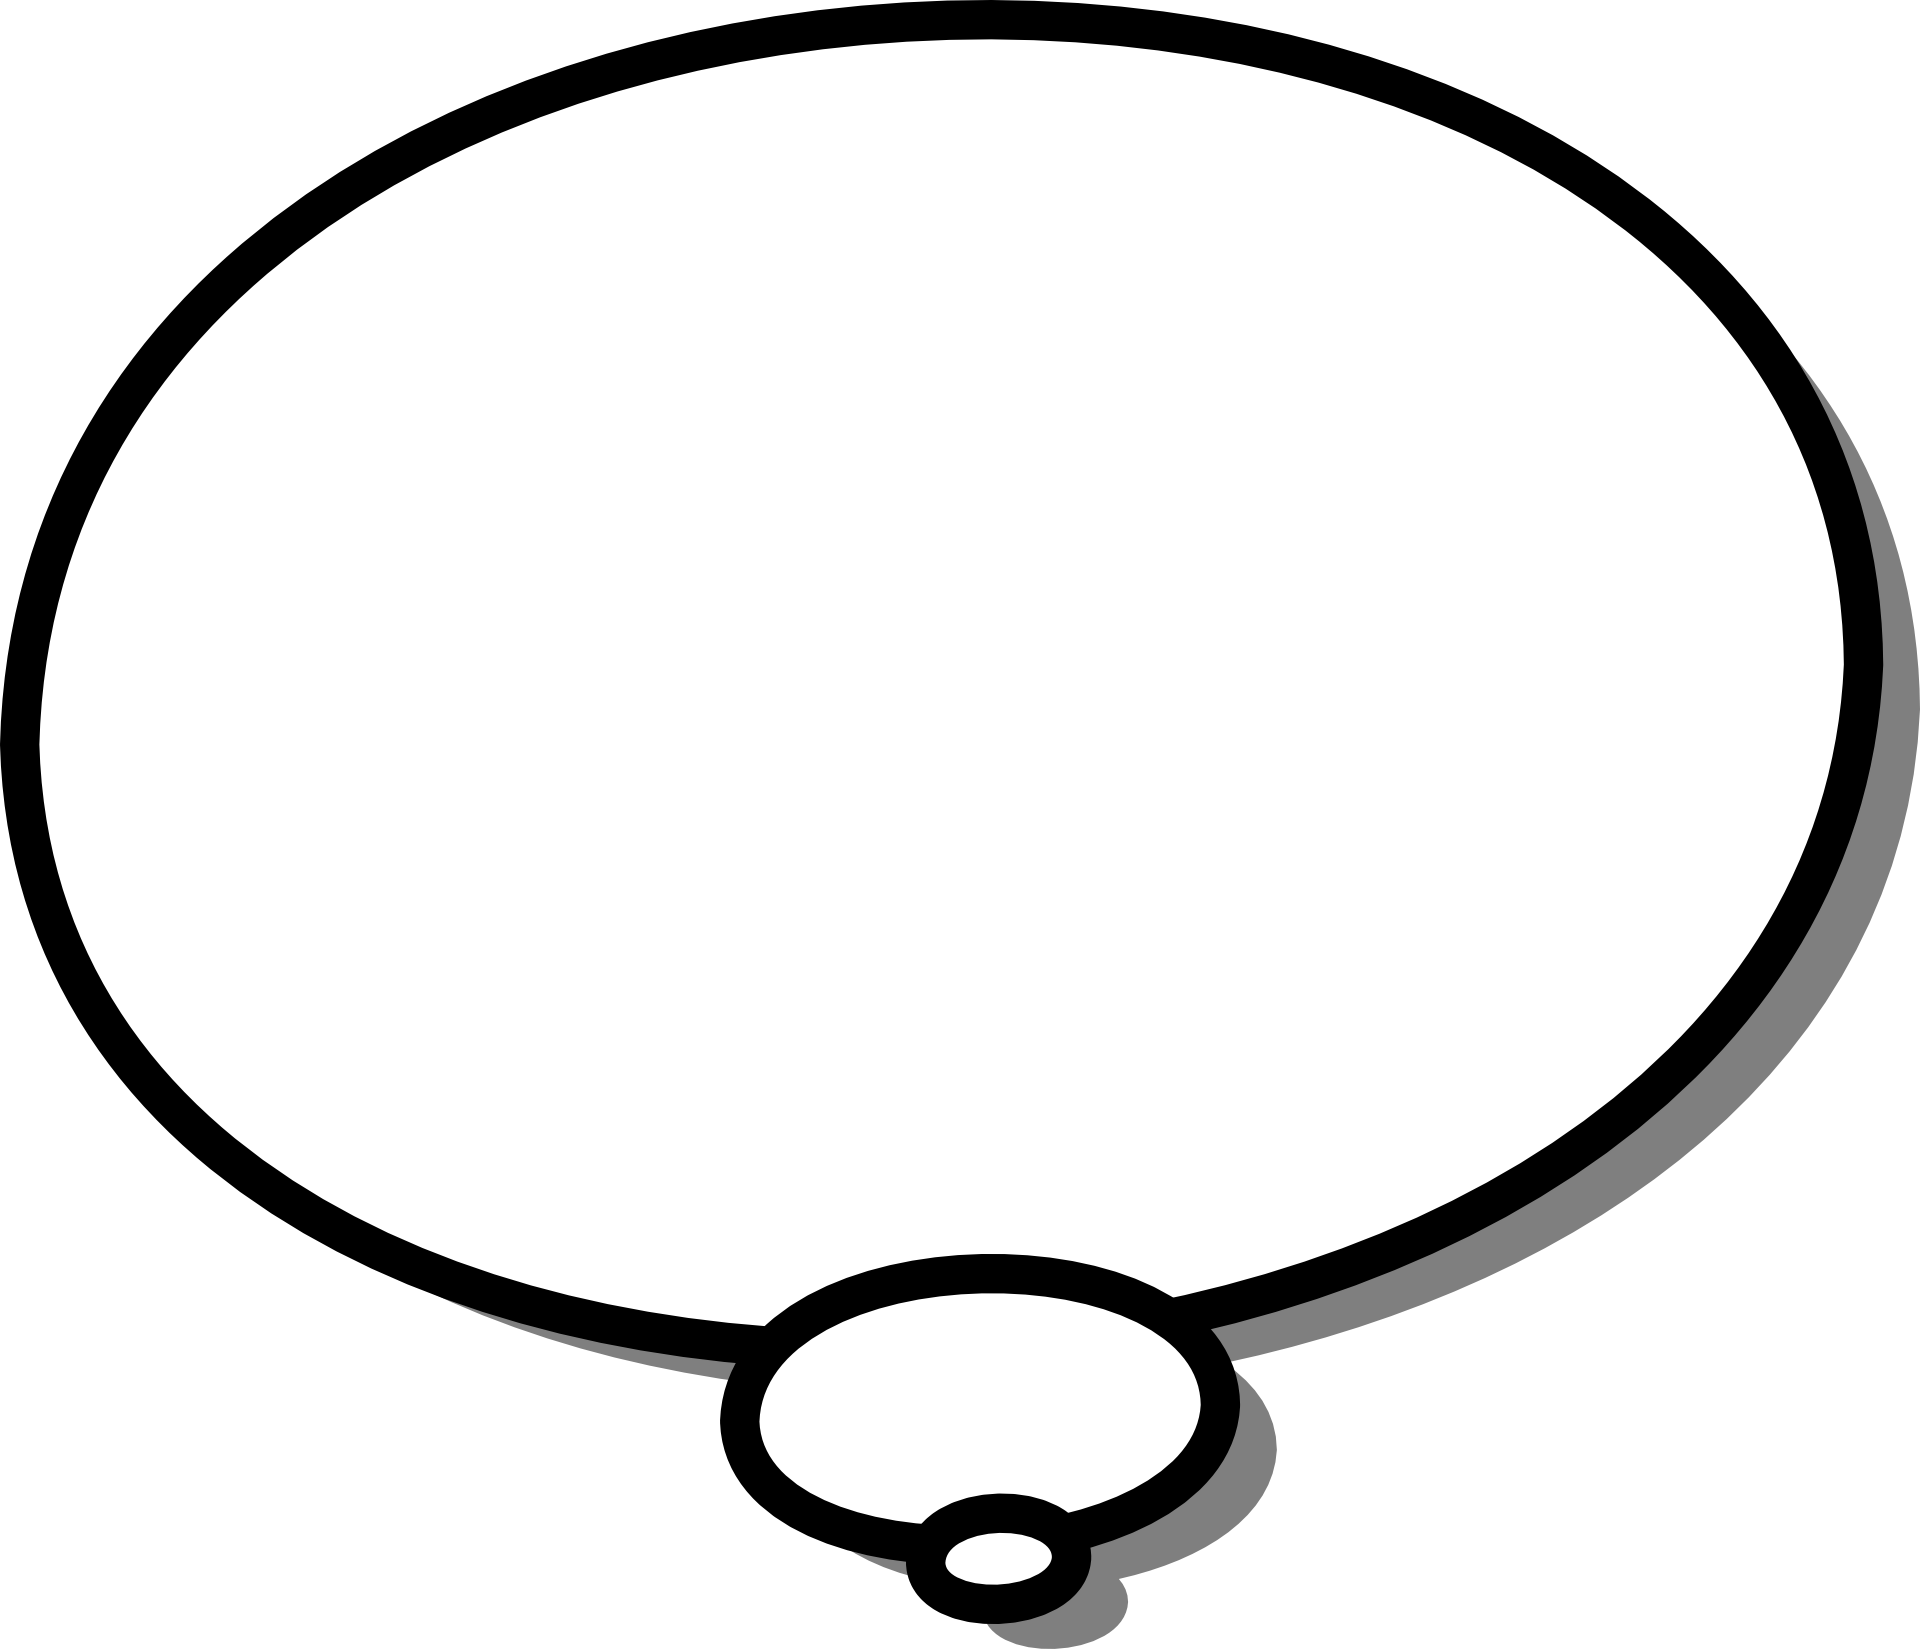 A Simple Black And White, Round Cartoon Callout With - Speech Bubble Black Background (1920x1649)